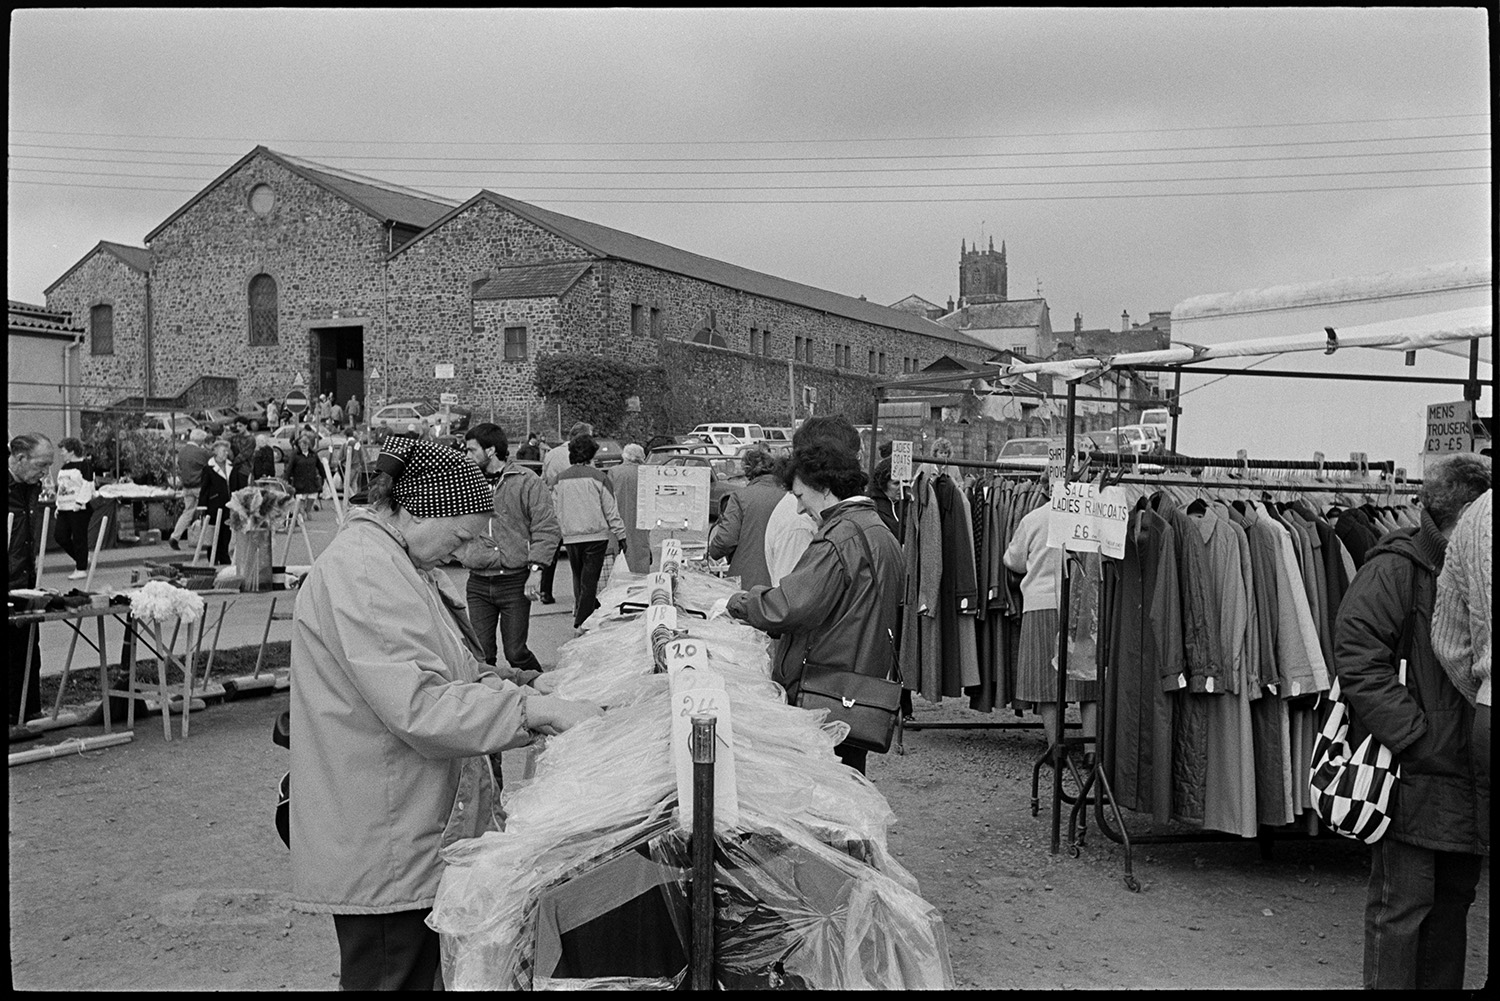 Market hall and cattle market, farmers chatting, loading cows on to trailer.
[People looking around clothes stalls on the site of the South Molton Livestock Market. Two women are looking through a row of coats hanging on a rail. There are rails of clothes, parked cars, stalls, with market buildings and the church tower in the background.]